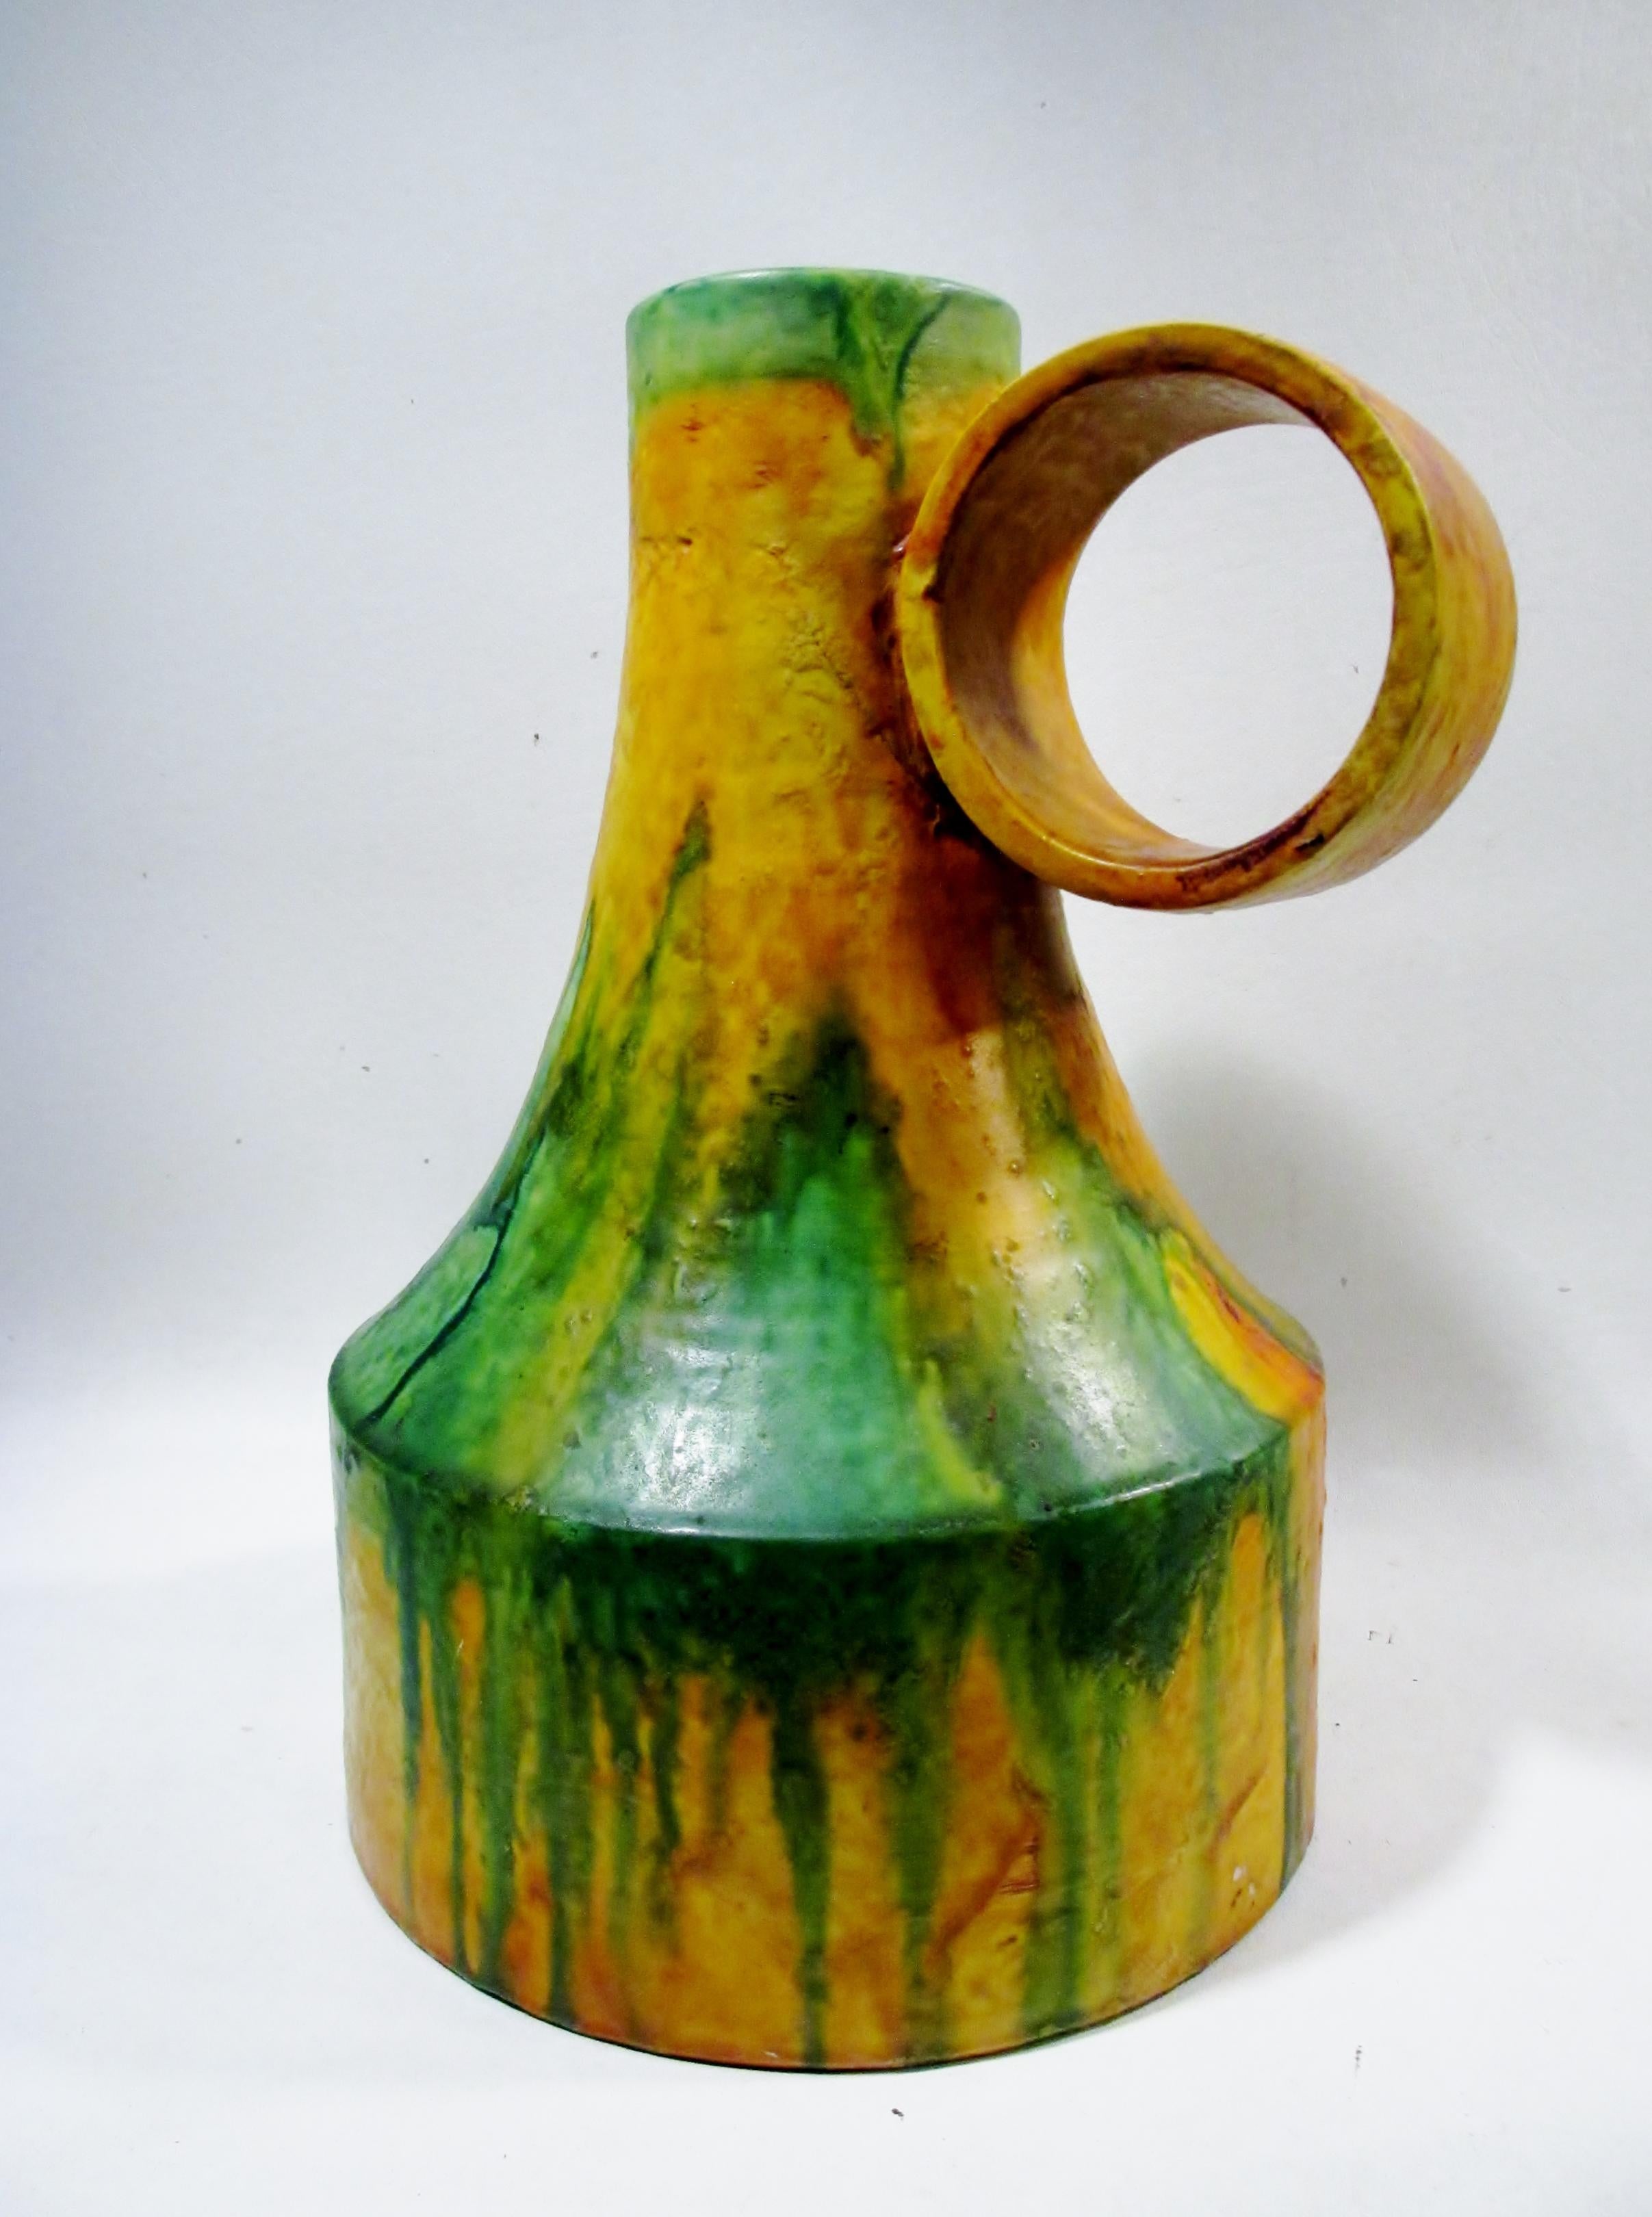 Outstanding large scale, 13.25” tall, 10” at widest, and 9” dia midcentury Italian art pottery loop handle vase from the studio of Marcello Fantoni. With his classic flambe drip glaze decoration in oranges, yellows, and greens. Retains the original